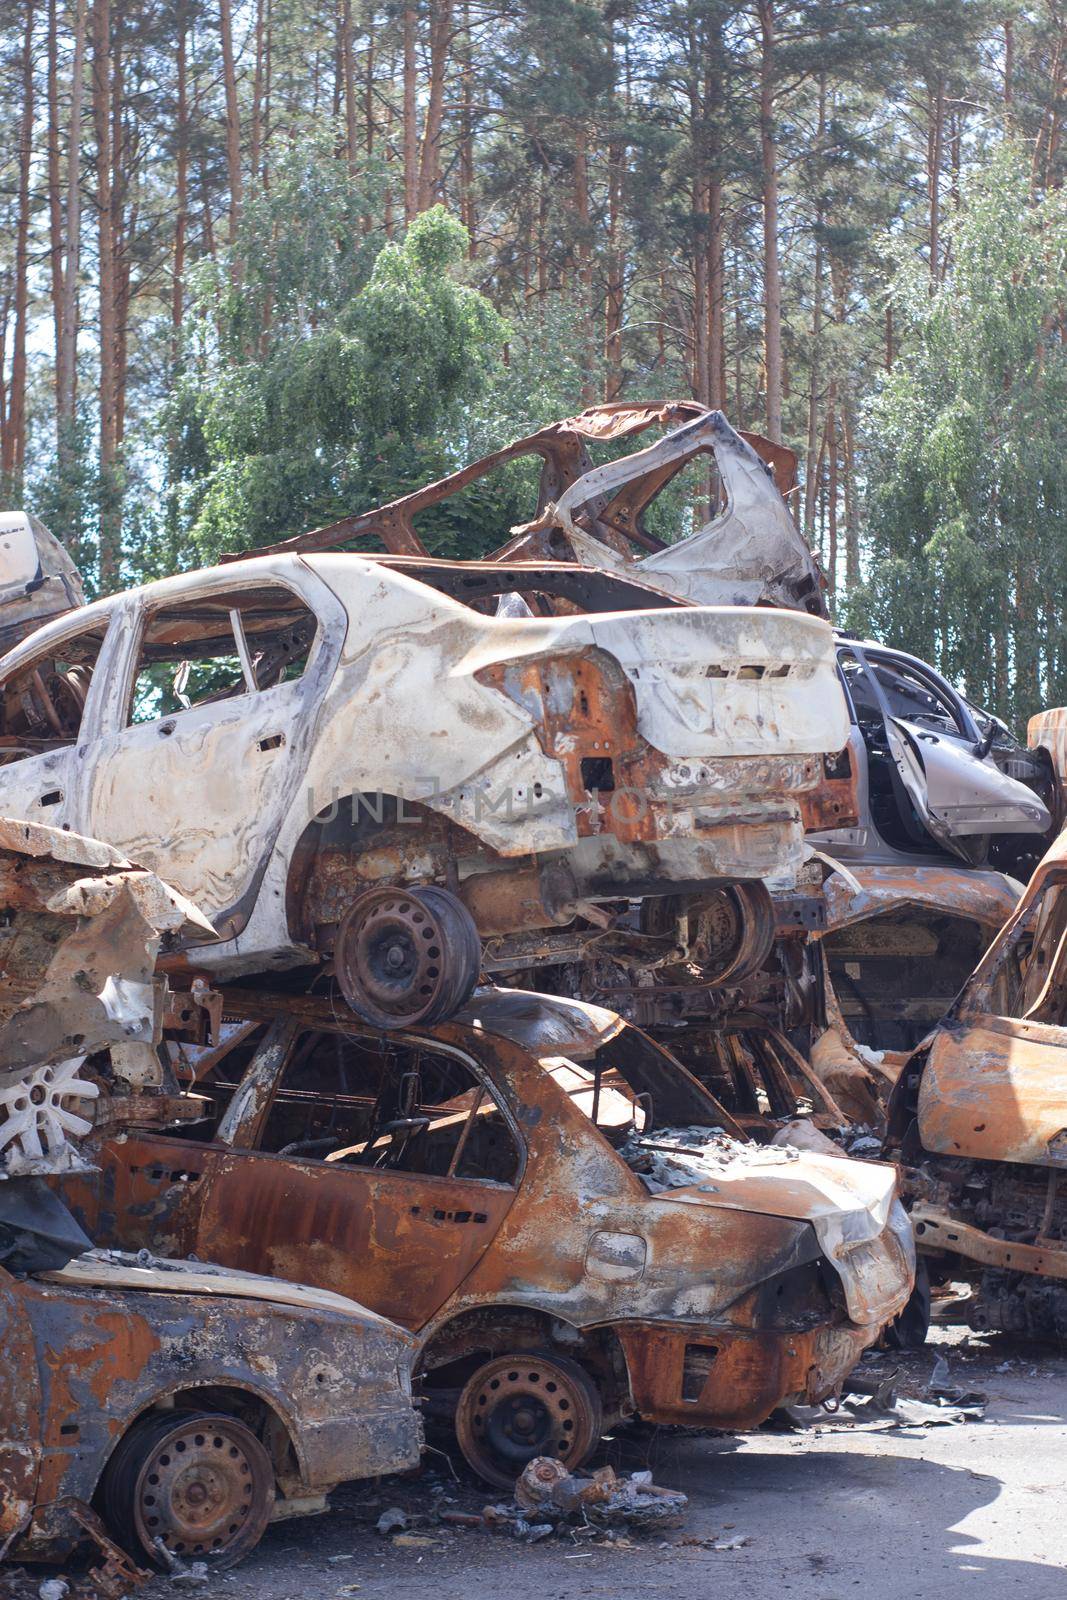 war in ukraine. Car graveyard. Shot cars of civilians. russia's war against Ukraine. Burnt and blown up car. Cars damaged after shelling. irpin bucha. war crimes by oliavesna